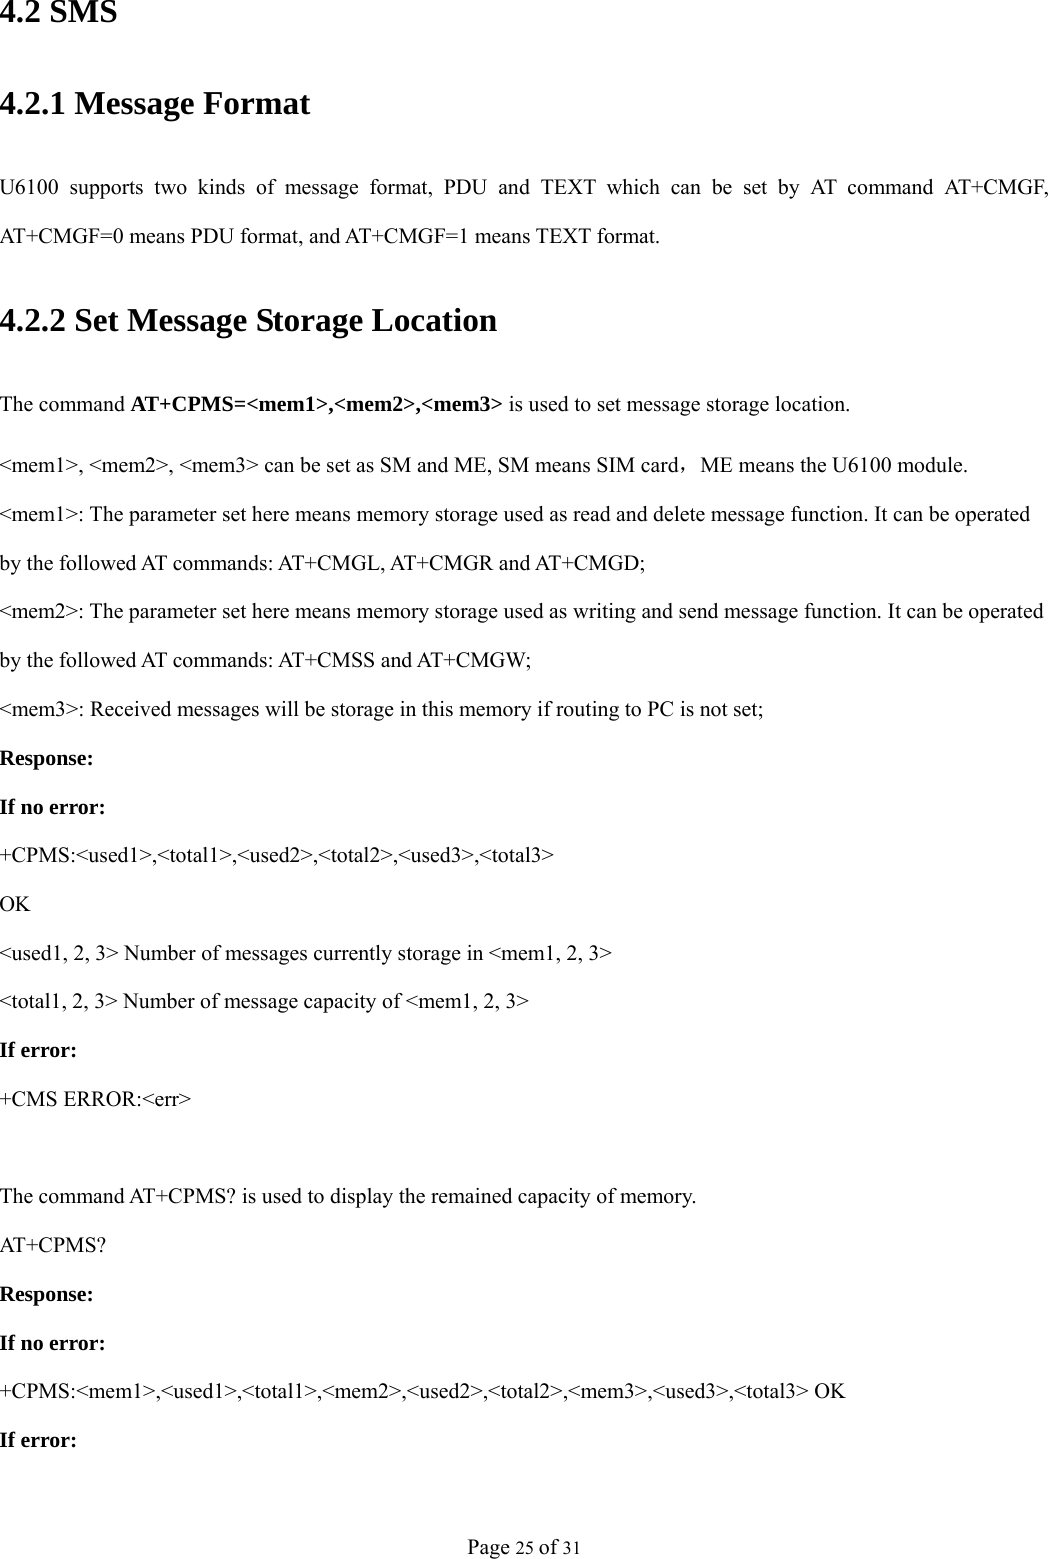 Page 25 of 31 4.2 SMS 4.2.1 Message Format U6100 supports two kinds of message format, PDU and TEXT which can be set by AT command AT+CMGF, AT+CMGF=0 means PDU format, and AT+CMGF=1 means TEXT format. 4.2.2 Set Message Storage Location The command AT+CPMS=&lt;mem1&gt;,&lt;mem2&gt;,&lt;mem3&gt; is used to set message storage location. &lt;mem1&gt;, &lt;mem2&gt;, &lt;mem3&gt; can be set as SM and ME, SM means SIM card，ME means the U6100 module. &lt;mem1&gt;: The parameter set here means memory storage used as read and delete message function. It can be operated by t h e  f o ll o w e d  AT c o mm a n d s :  AT +CM G L ,  AT + CMGR  a nd AT+C M G D;  &lt;mem2&gt;: The parameter set here means memory storage used as writing and send message function. It can be operated by the followed AT commands: AT+CMSS and AT+CMGW; &lt;mem3&gt;: Received messages will be storage in this memory if routing to PC is not set; Response: If no error: +CPMS:&lt;used1&gt;,&lt;total1&gt;,&lt;used2&gt;,&lt;total2&gt;,&lt;used3&gt;,&lt;total3&gt; OK &lt;used1, 2, 3&gt; Number of messages currently storage in &lt;mem1, 2, 3&gt; &lt;total1, 2, 3&gt; Number of message capacity of &lt;mem1, 2, 3&gt; If error: +CMS ERROR:&lt;err&gt;  The command AT+CPMS? is used to display the remained capacity of memory. AT+C PM S?  Response: If no error: +CPMS:&lt;mem1&gt;,&lt;used1&gt;,&lt;total1&gt;,&lt;mem2&gt;,&lt;used2&gt;,&lt;total2&gt;,&lt;mem3&gt;,&lt;used3&gt;,&lt;total3&gt; OK   If error: 